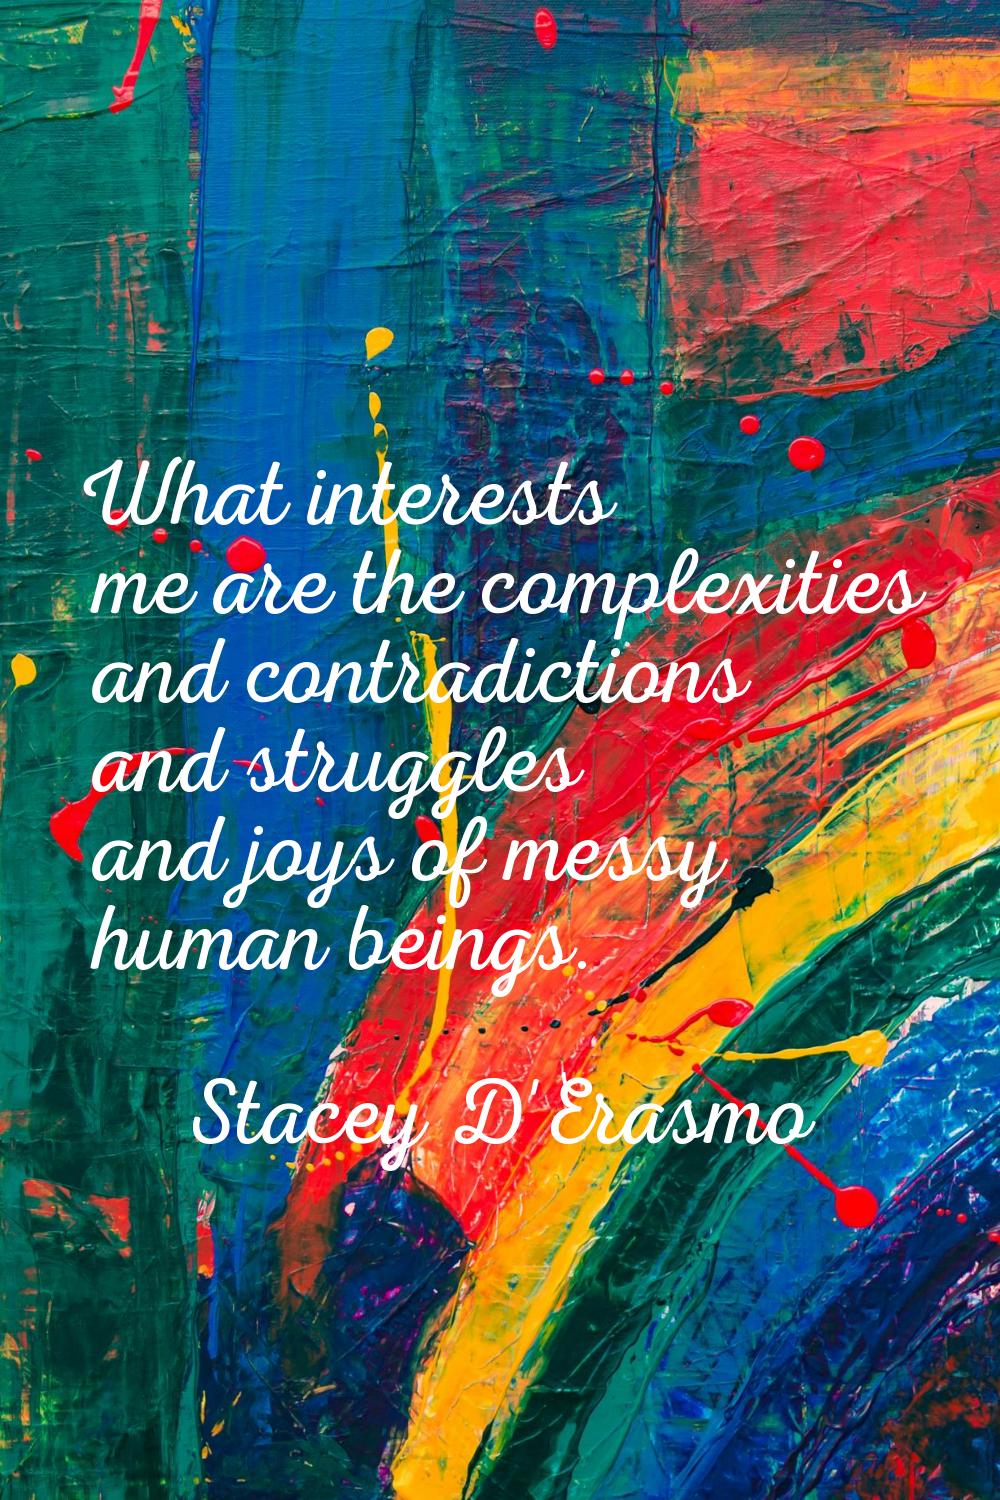 What interests me are the complexities and contradictions and struggles and joys of messy human bei